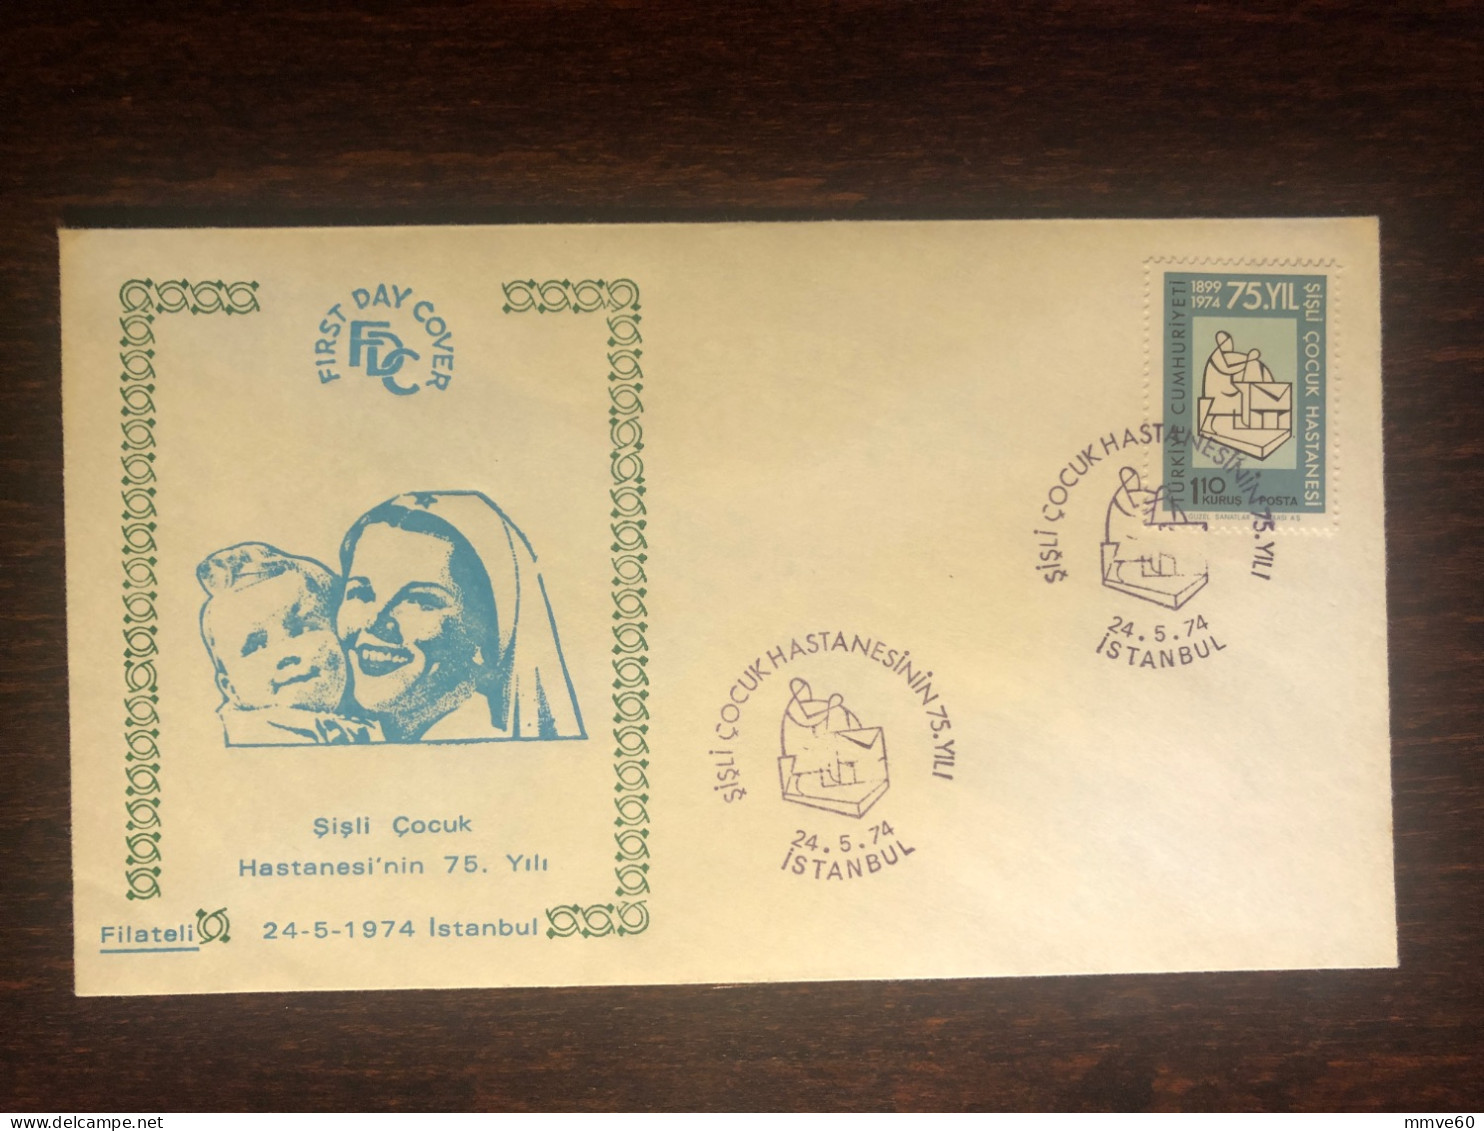 TURKEY FDC COVER 1974 YEAR CHILDREN HOSPITAL HEALTH MEDICINE STAMPS - FDC